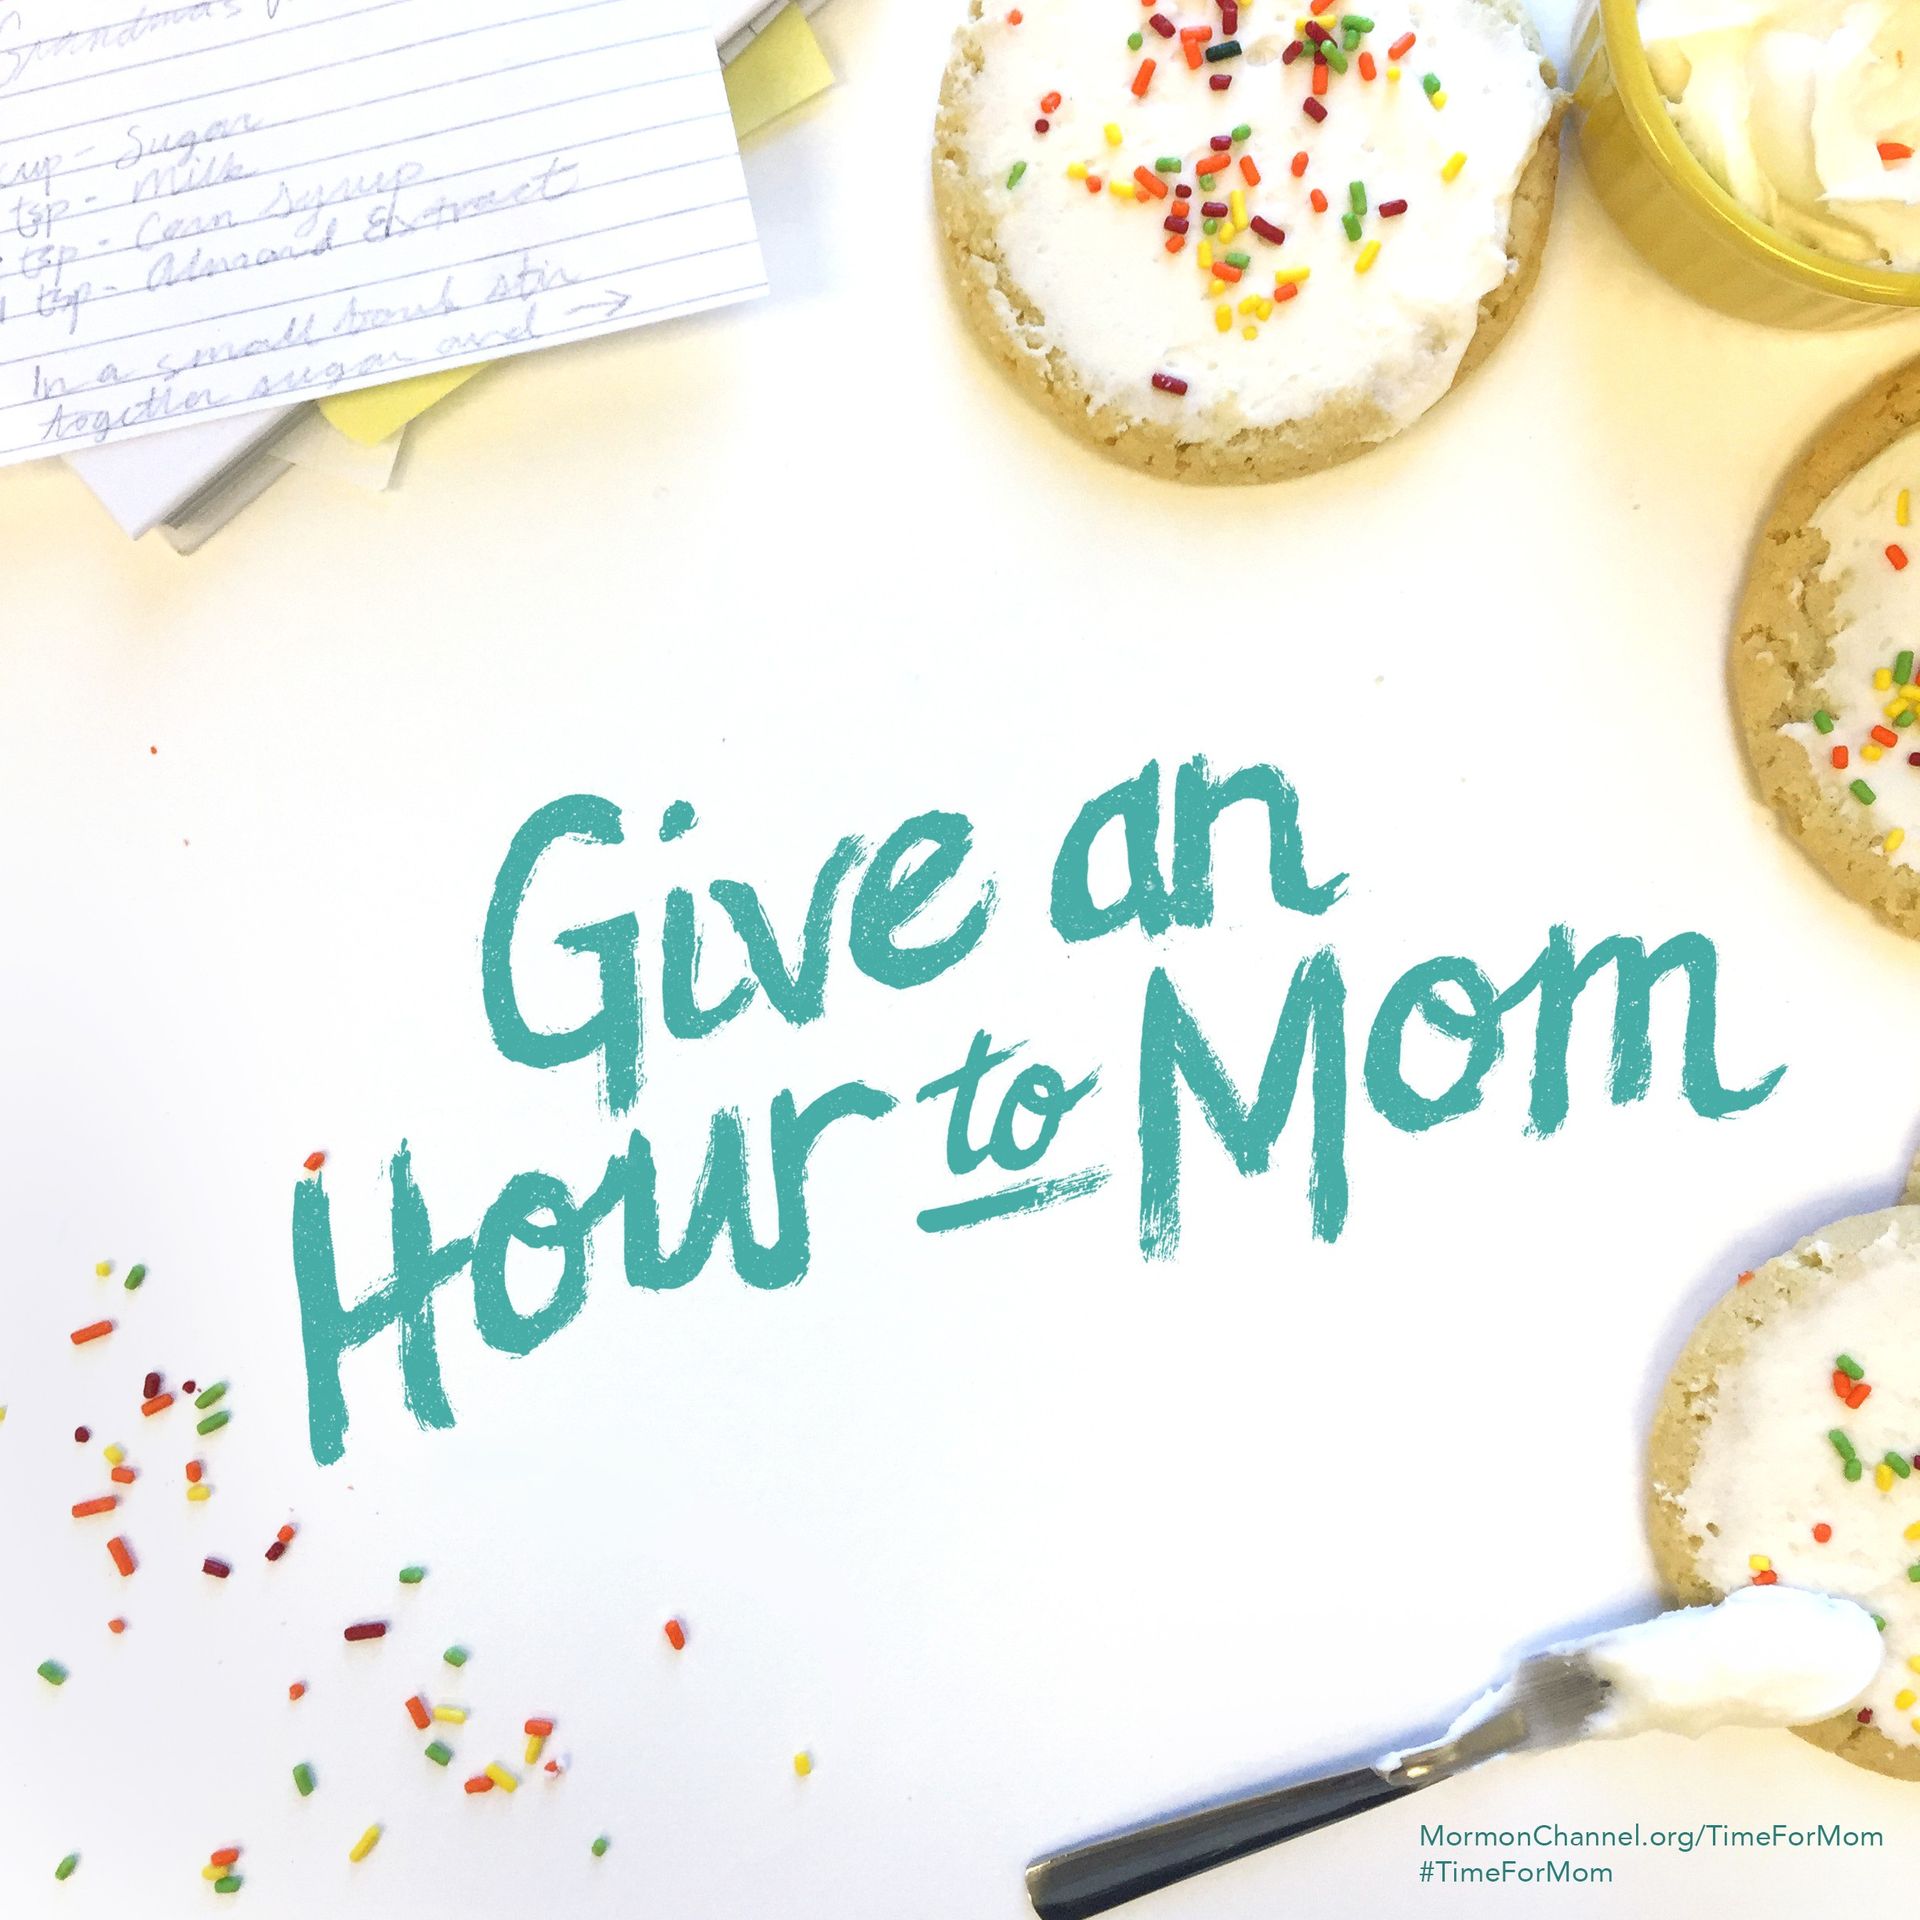 Give an hour to Mom. Find out how to make #TimeForMom here.